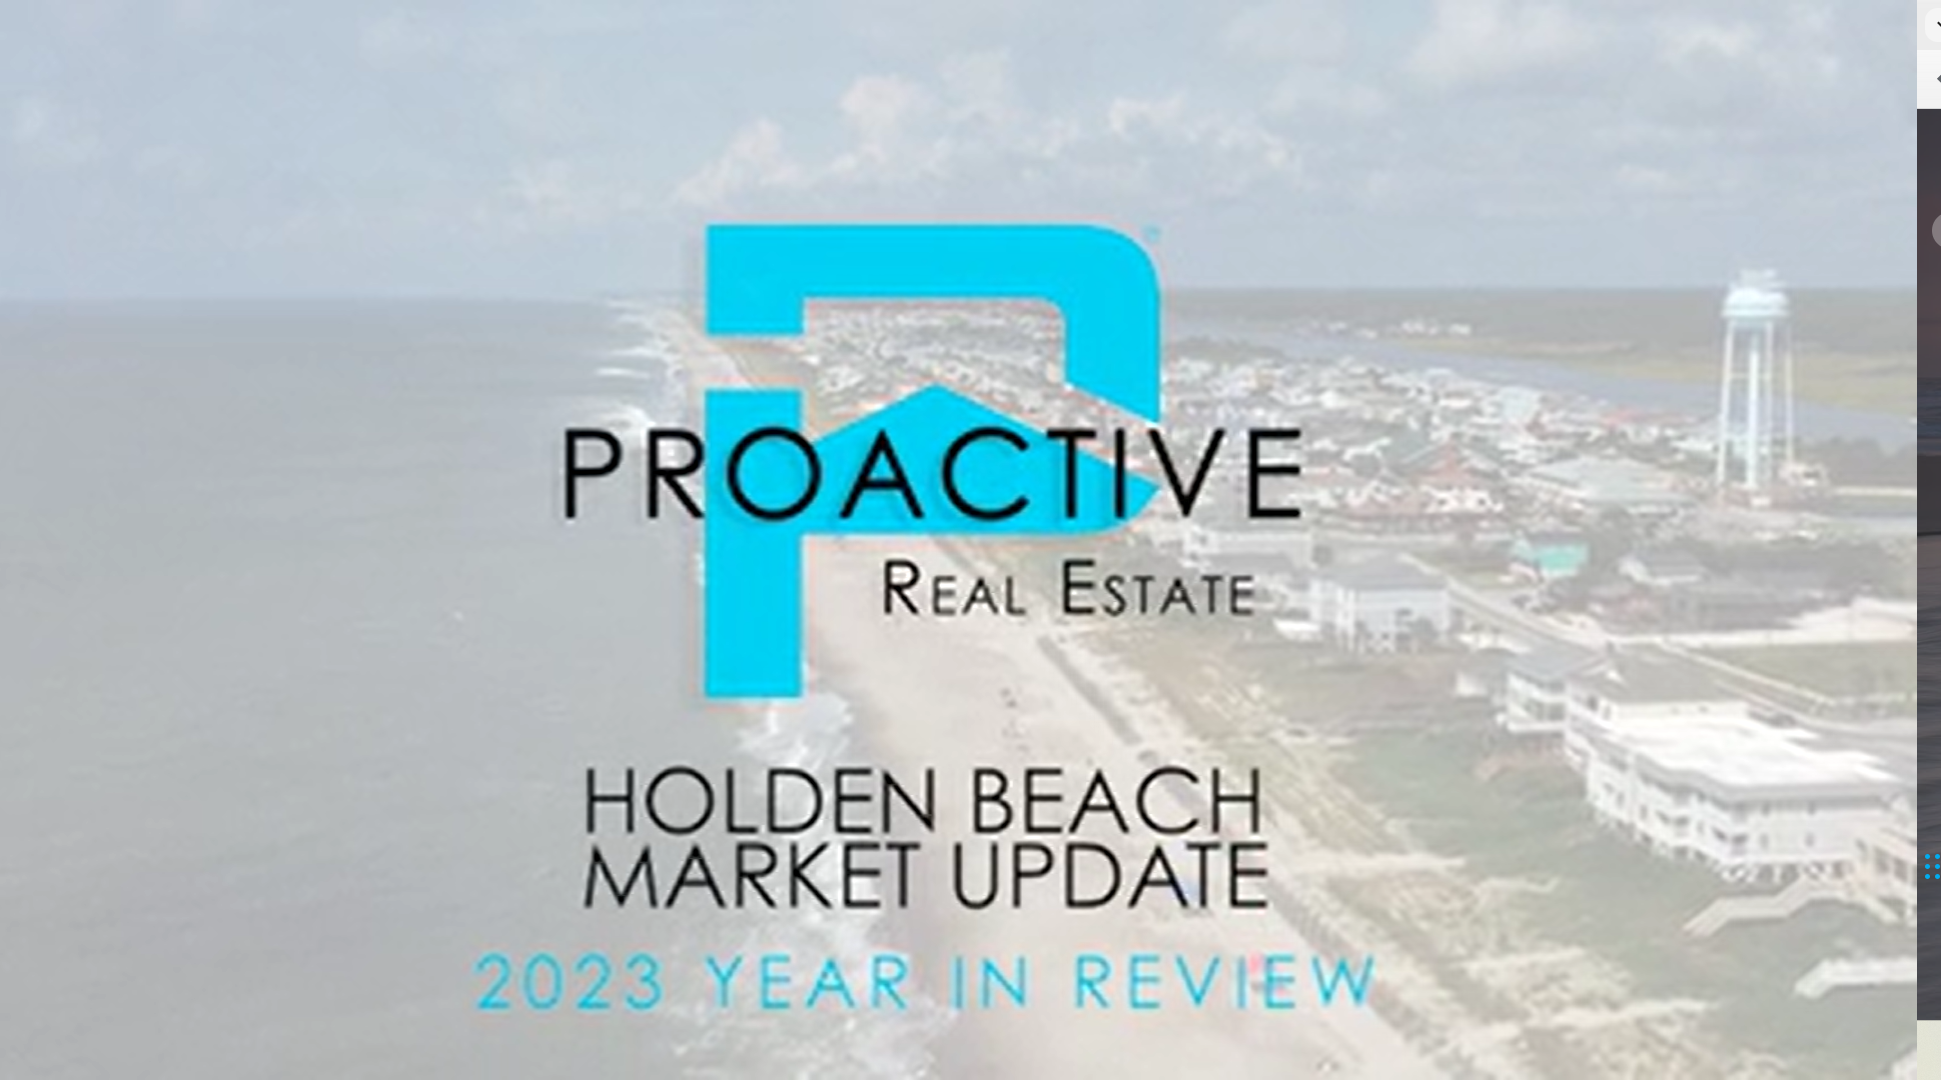 Holden Beach Real Estate Market Update – 2023 Year in Review